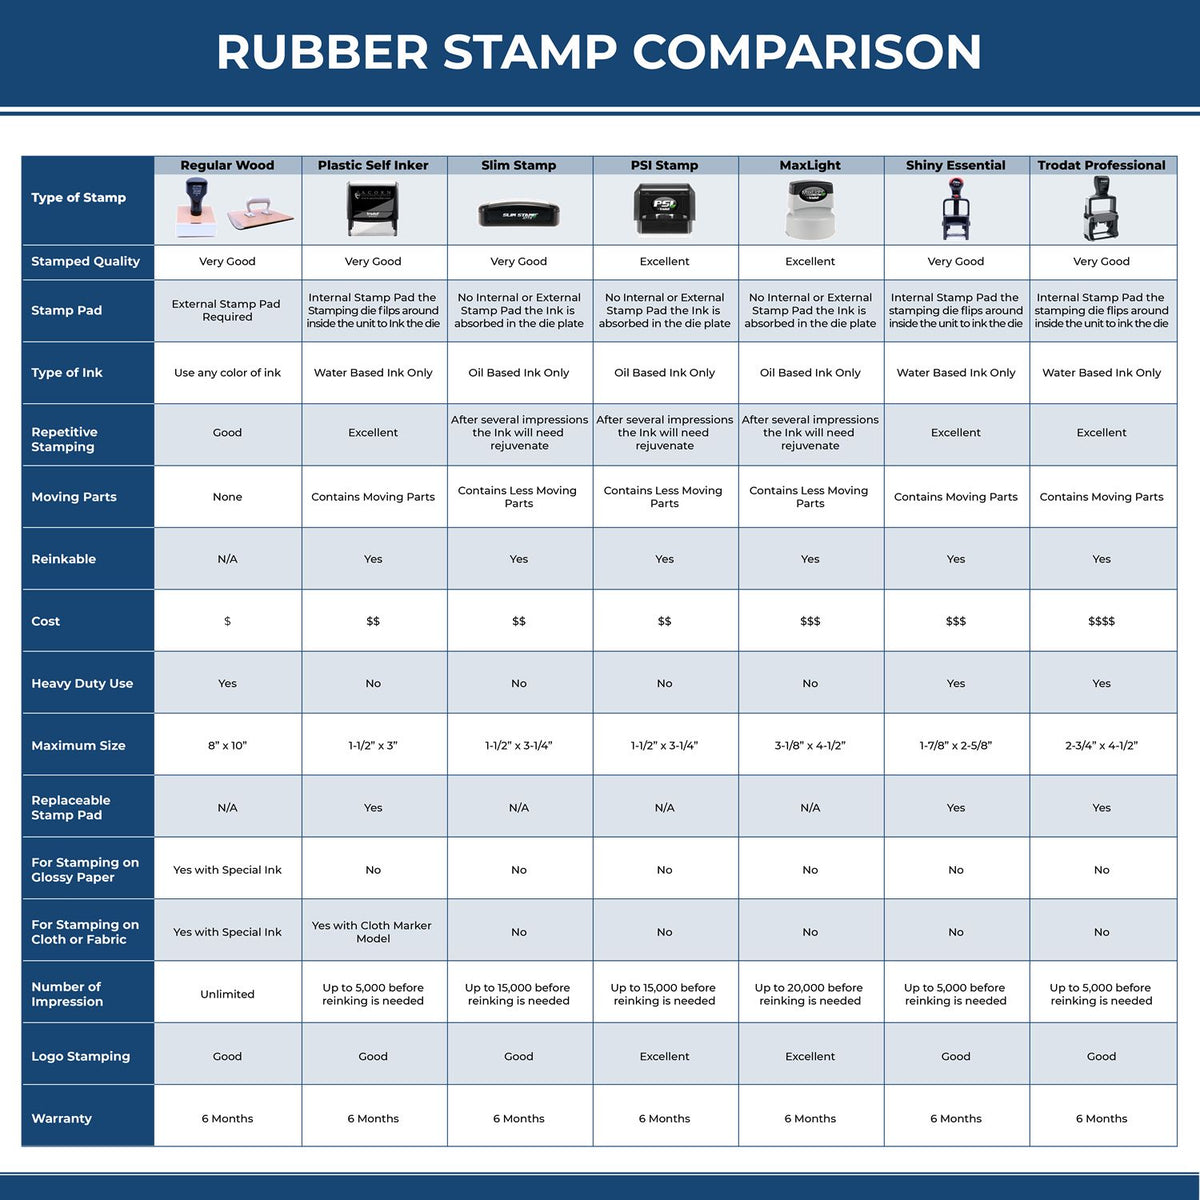 A comparison chart for the different types of mount models available for the Wooden Handle North Dakota Rectangular Notary Public Stamp.